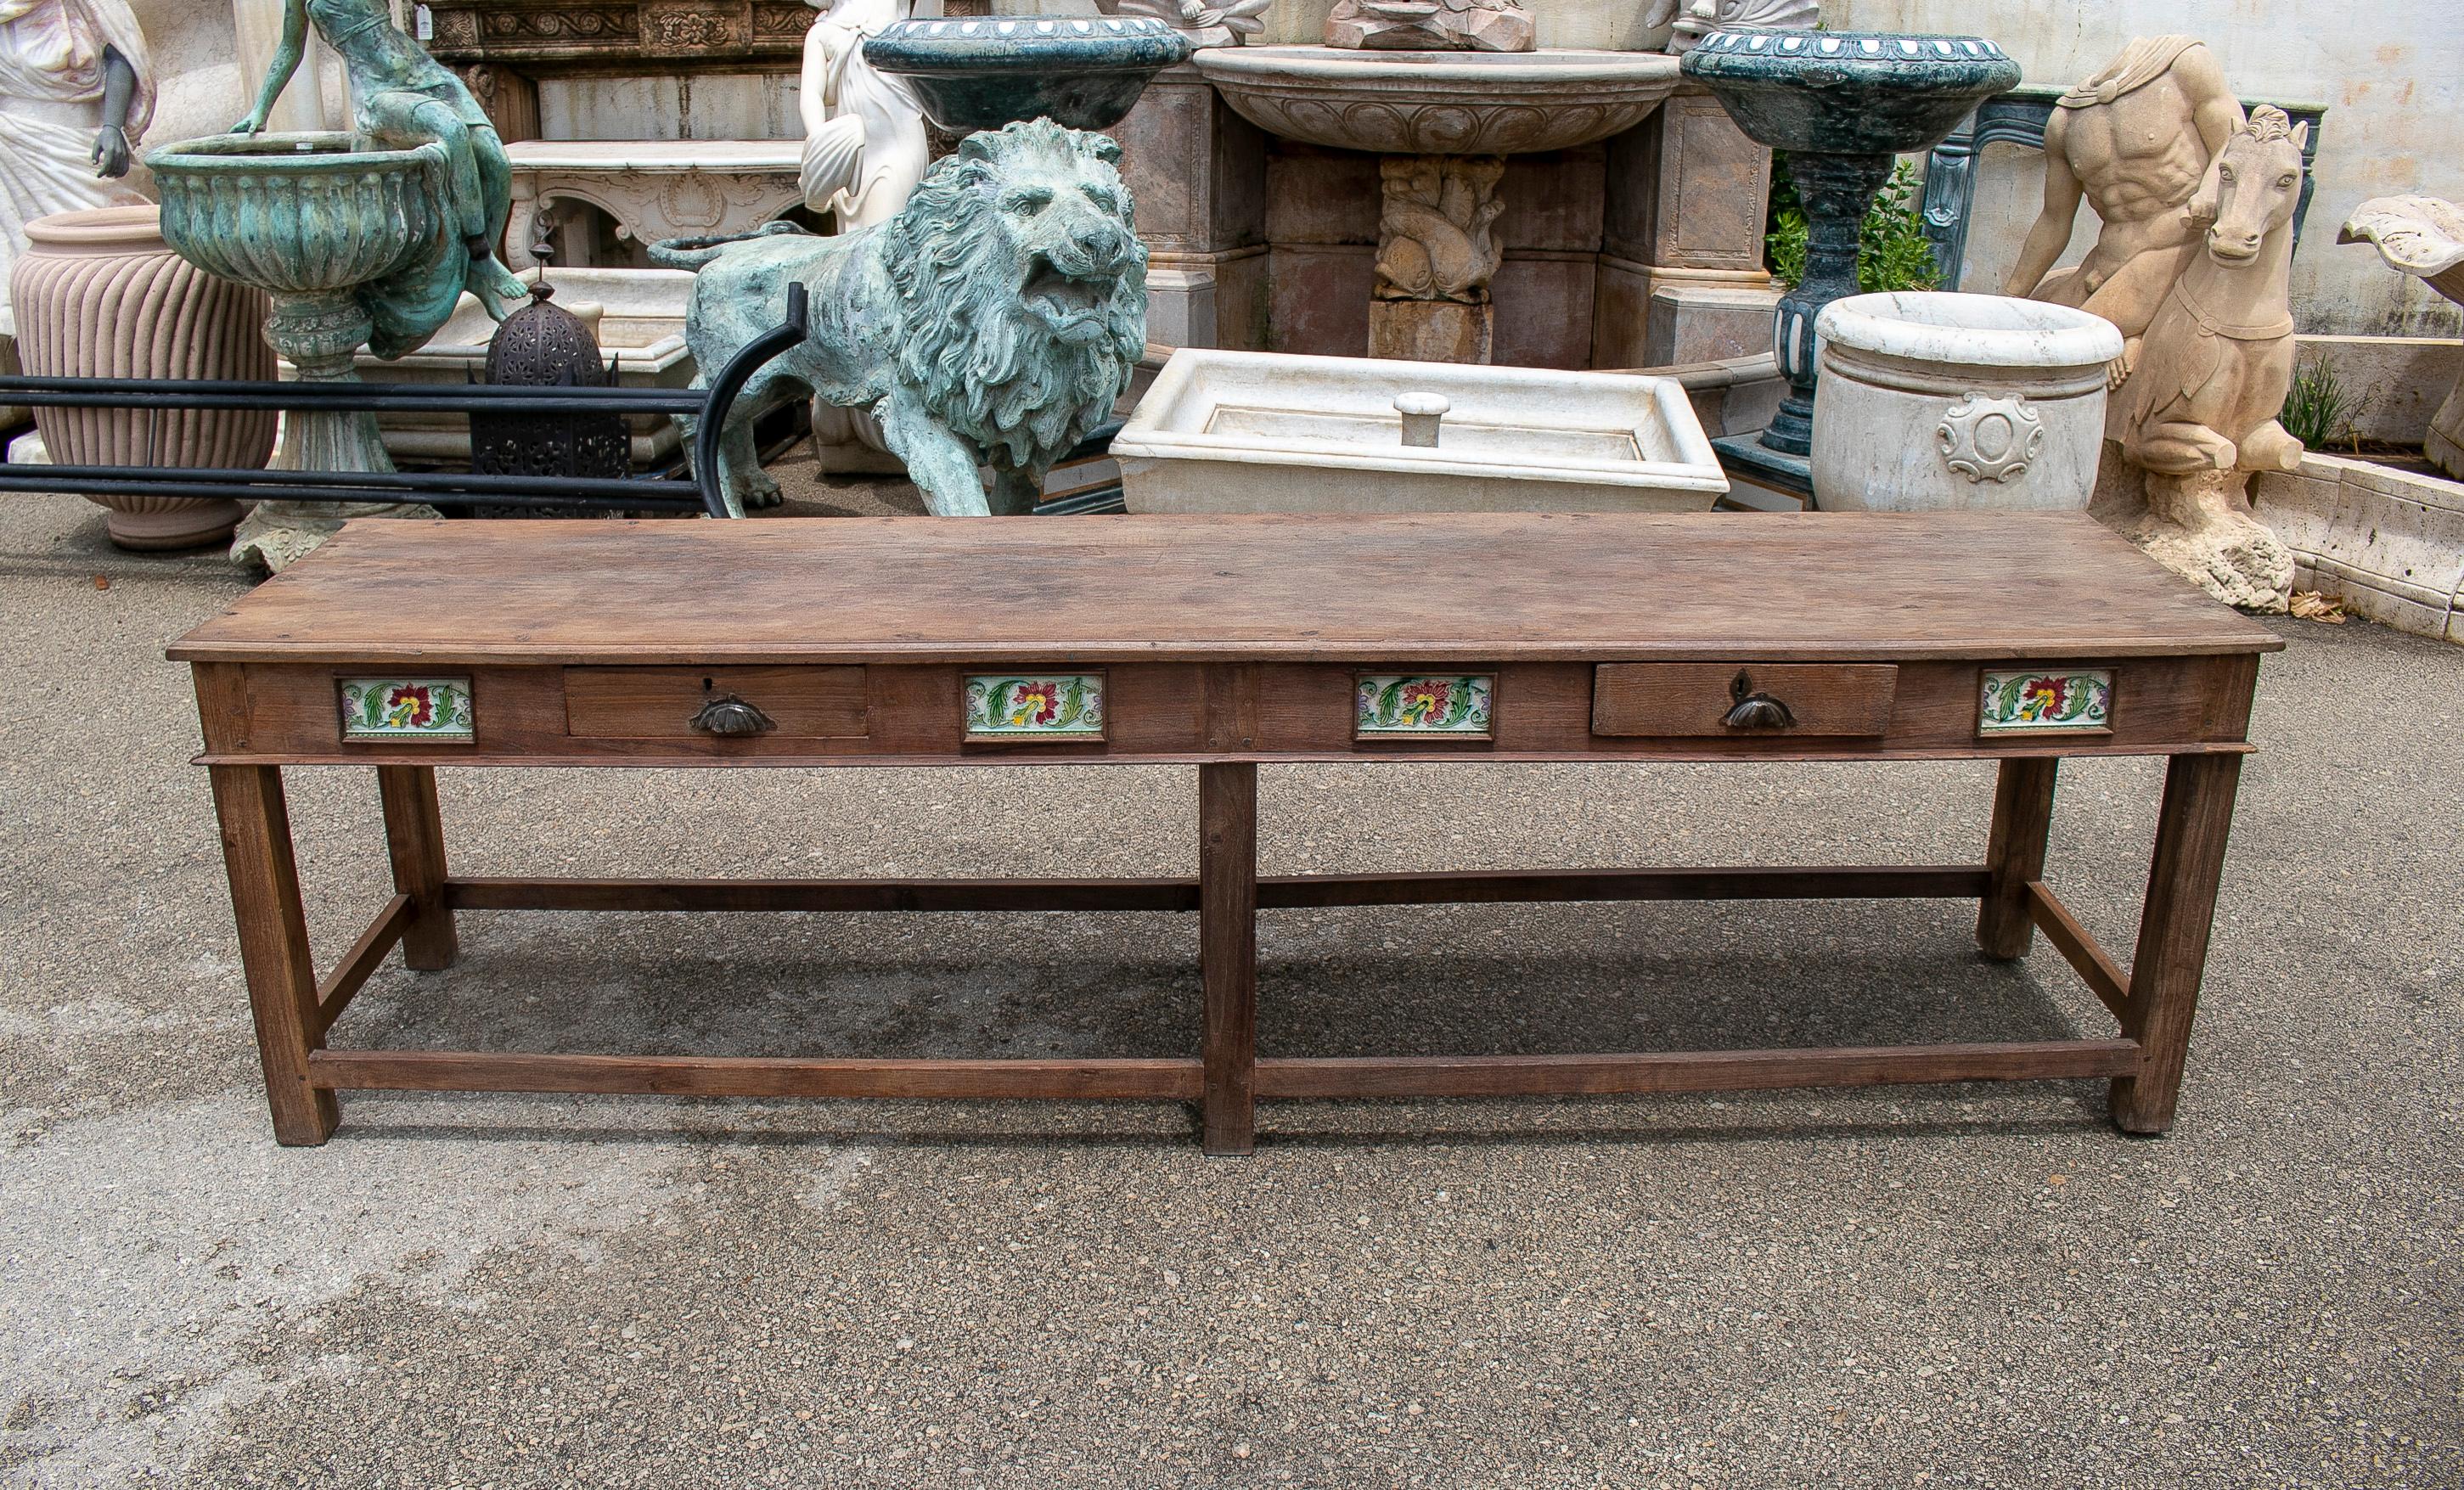 Rustic 1970s Spanish 2-drawer natural wood farmhouse table with glaze tiles.